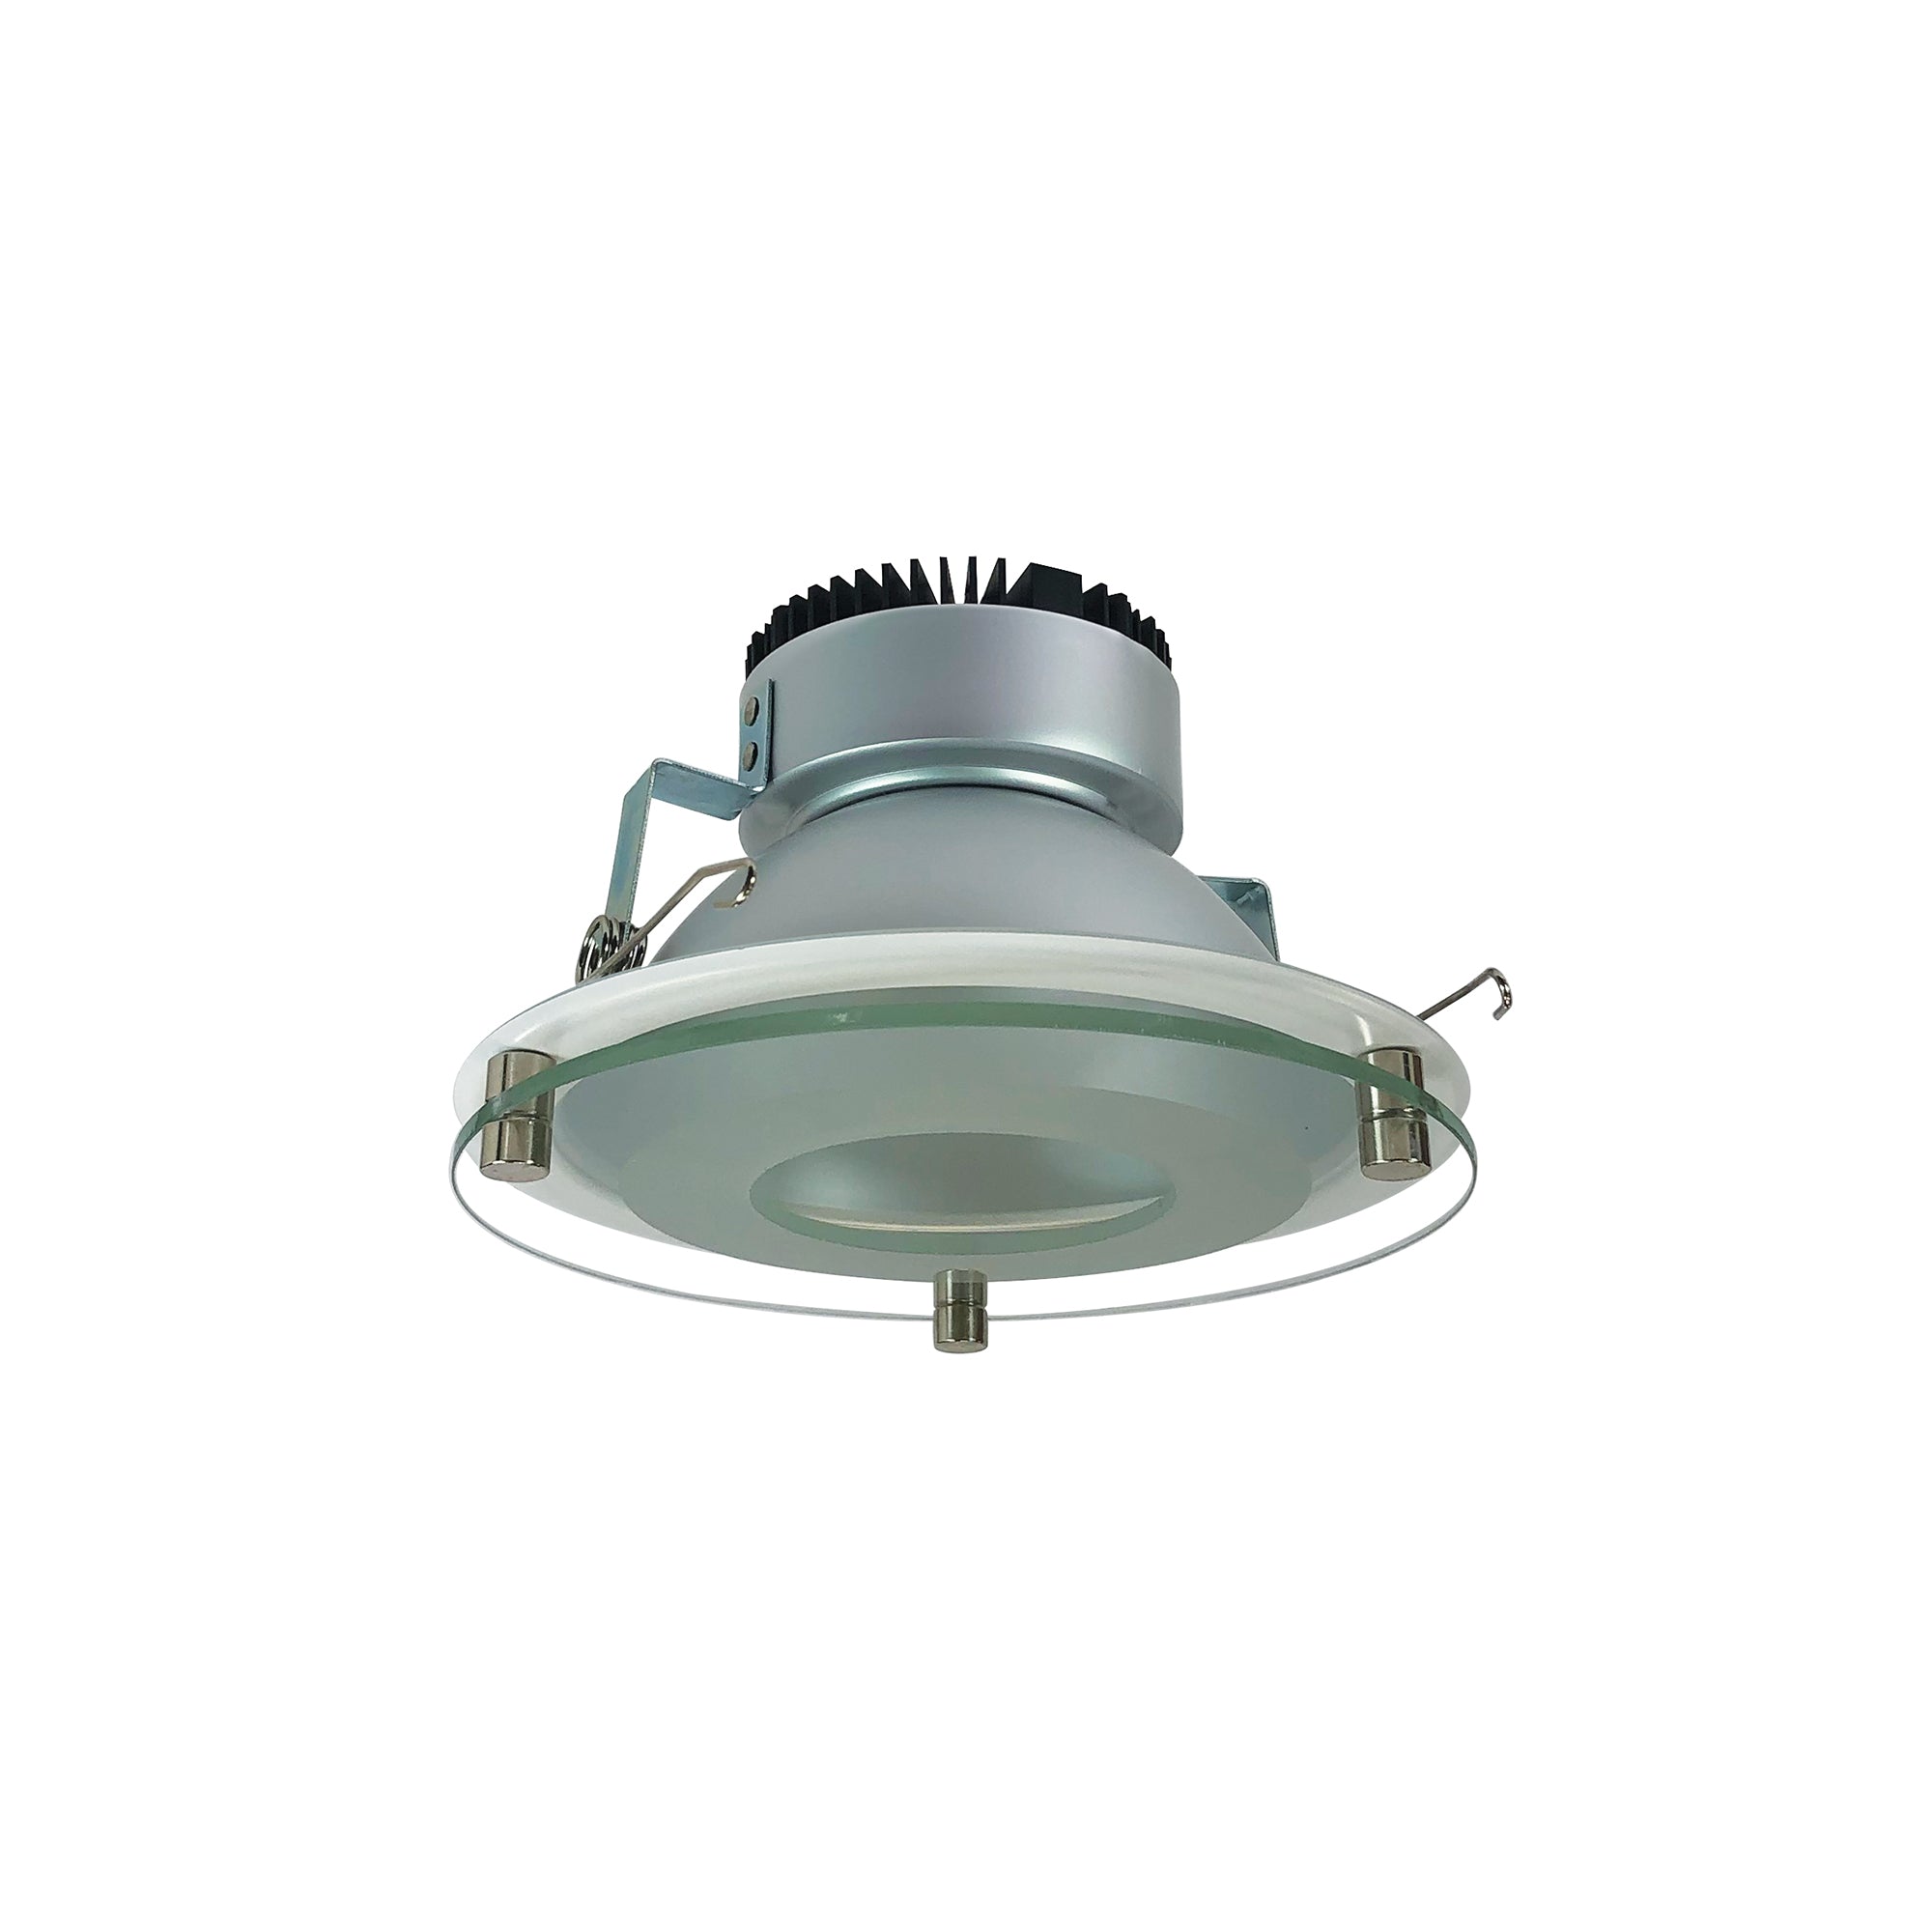 Nora Lighting NRM2-618L2530FHZW - Recessed - 6 Inch Marquise II Deco Glass Reflector, Flood, 2500lm, 3000K, Haze/White (Available with Non-IC Housings Only)